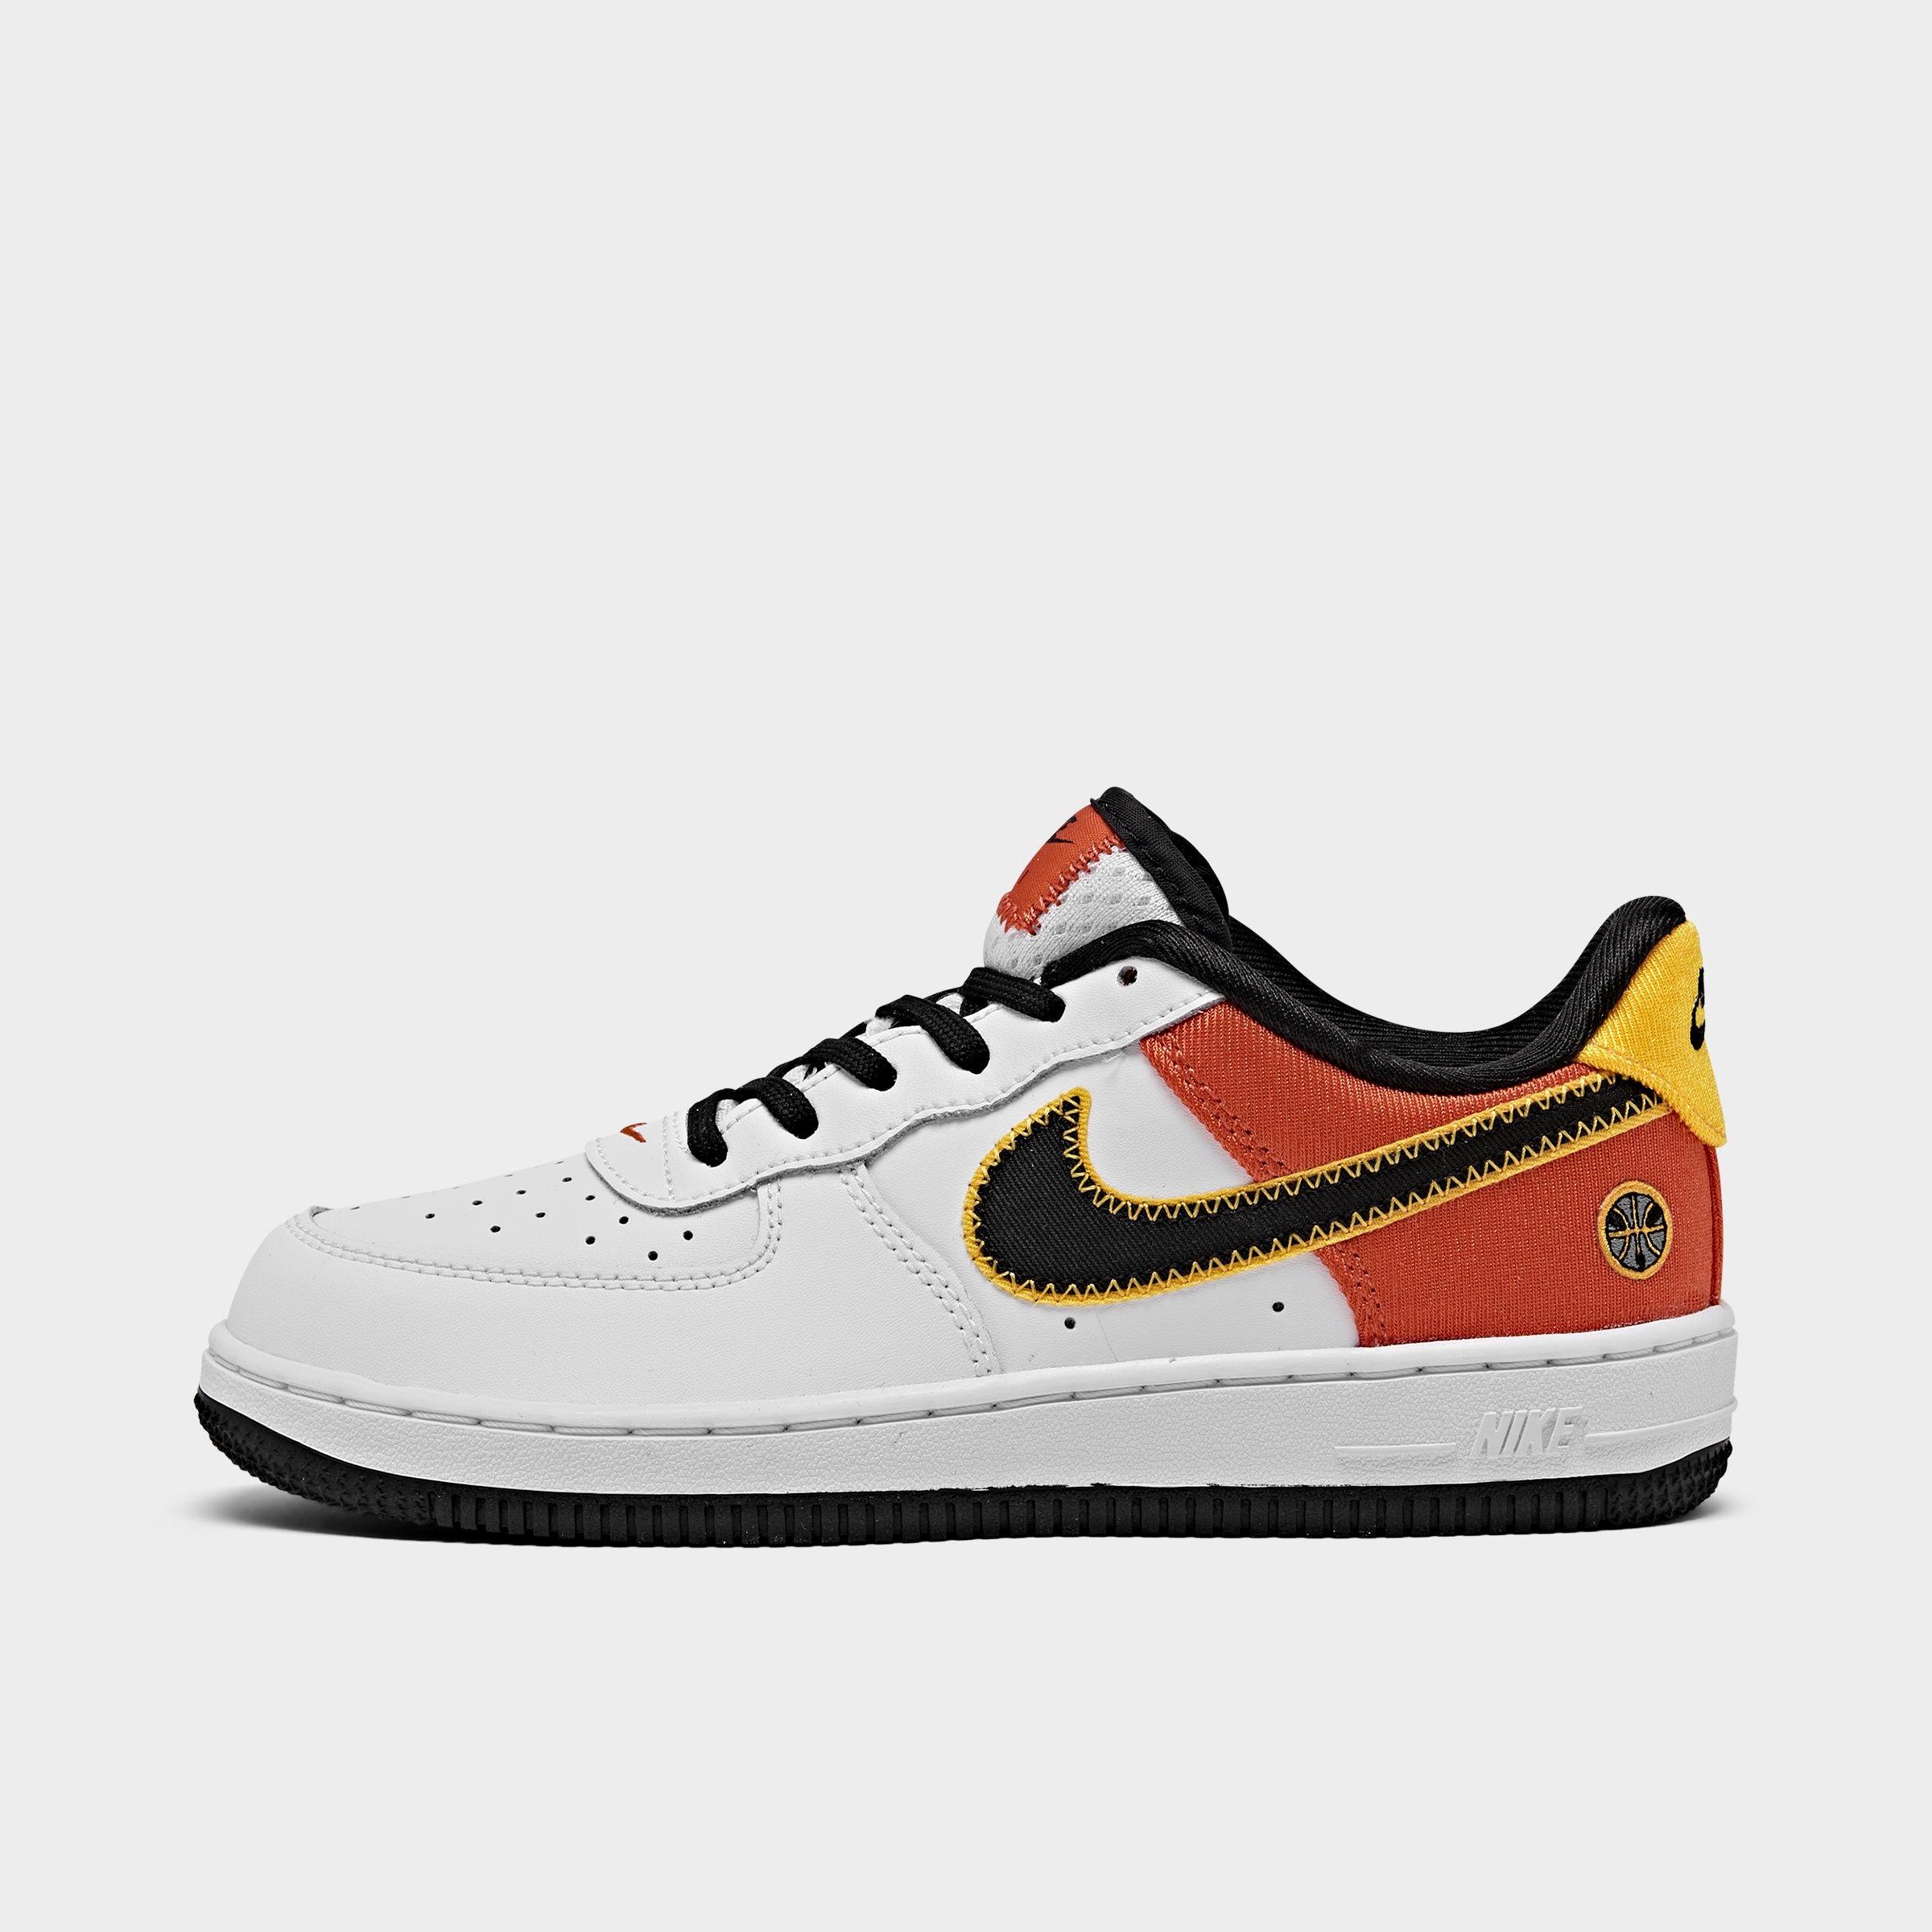 finish line air force 1s